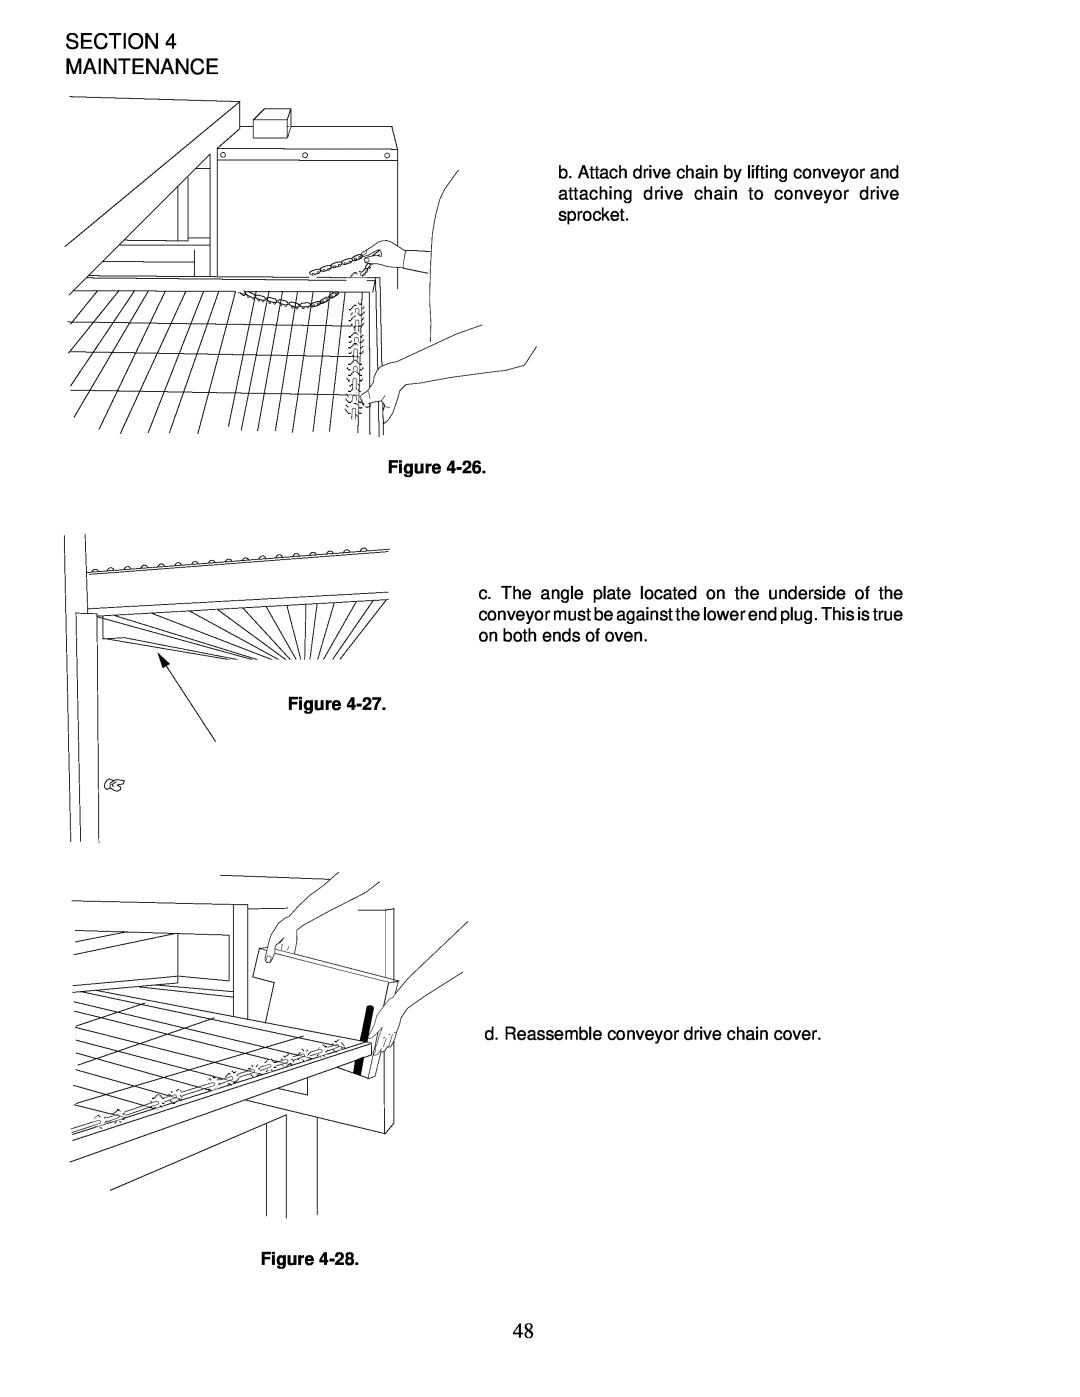 Middleby Marshall PS200-R68 installation manual Section Maintenance, Figure, d. Reassemble conveyor drive chain cover 